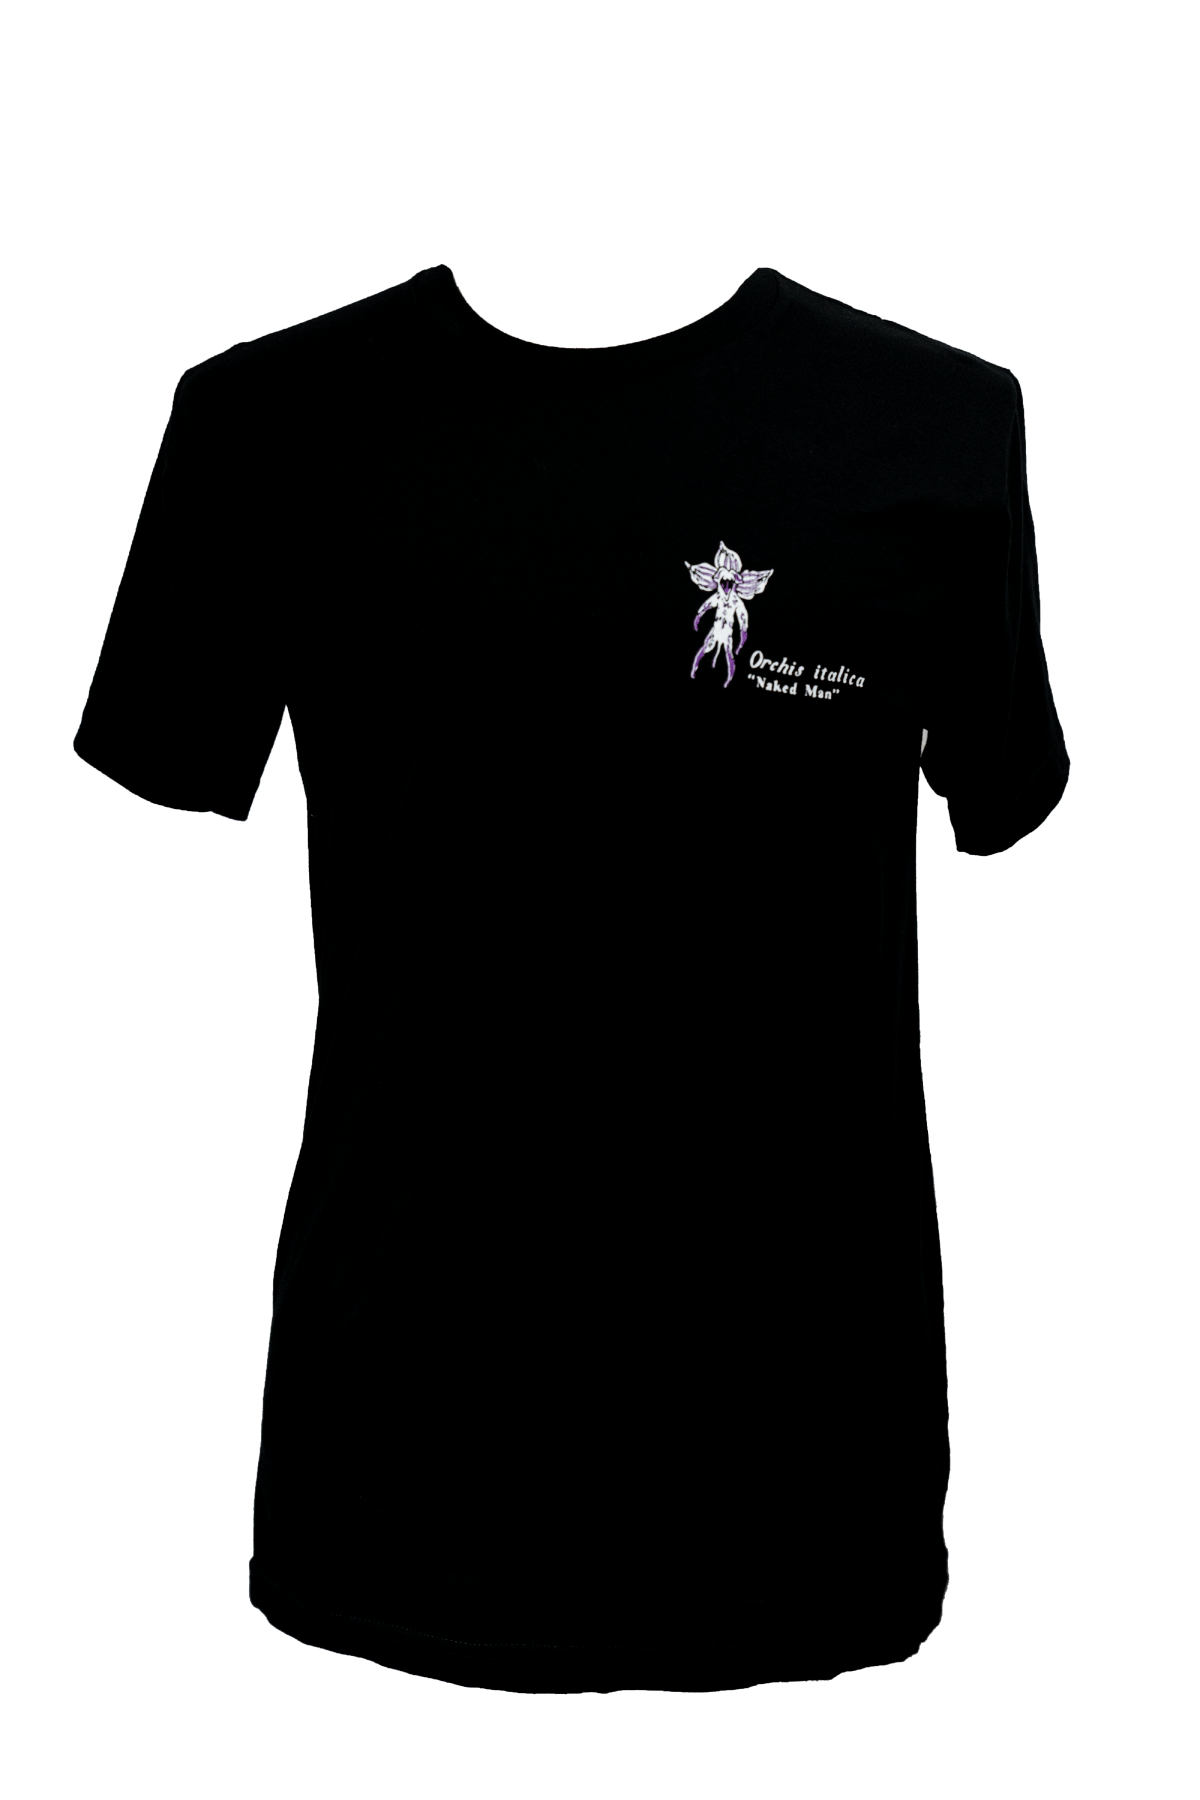 "Orchis italica" Short Sleeve Tee